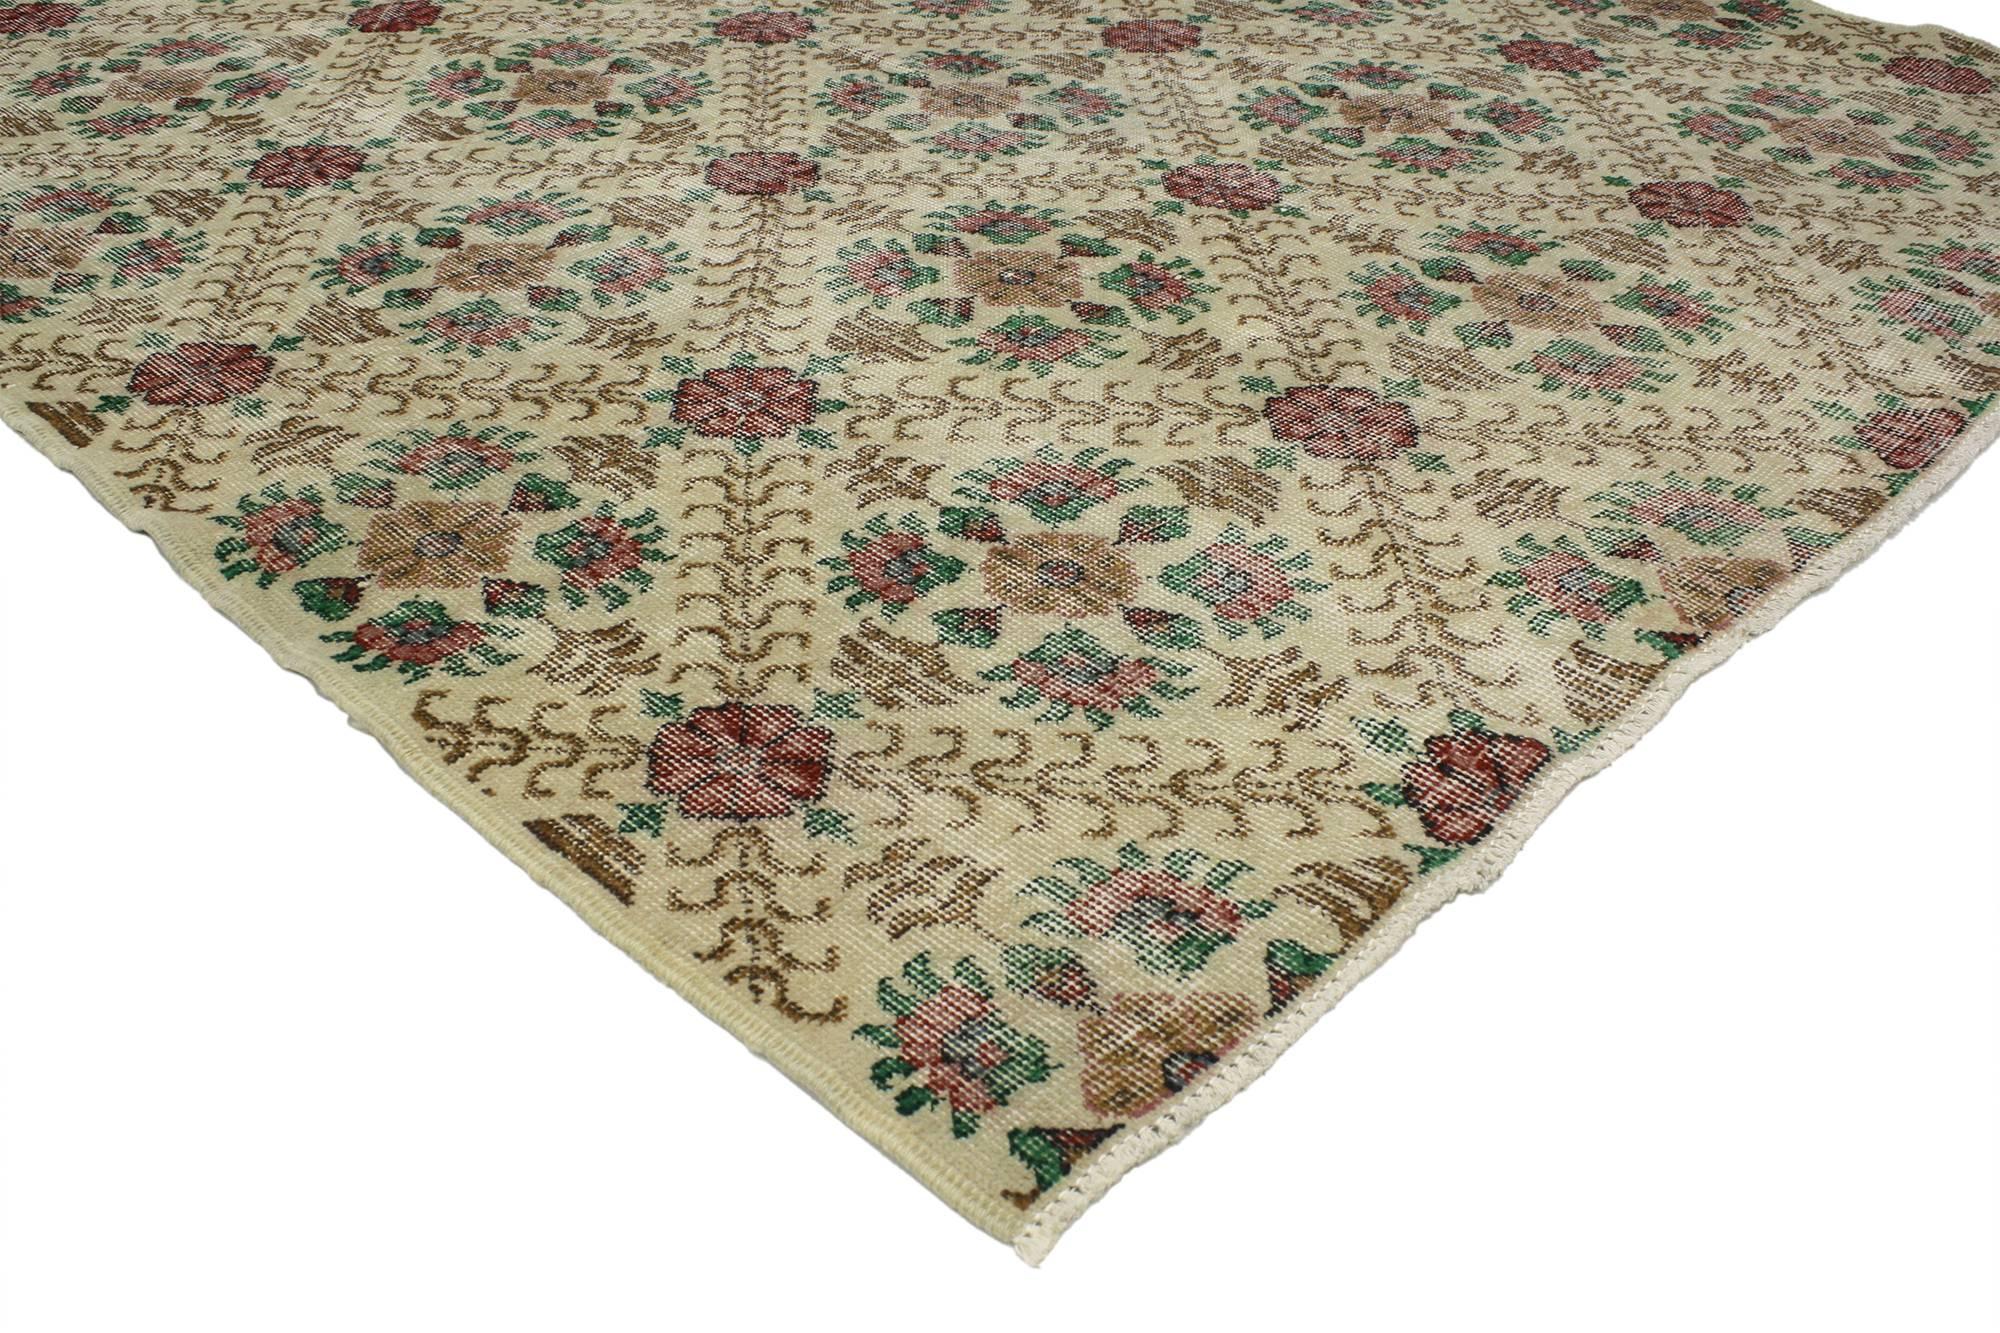 52018 Distressed Turkish Sivas Rug with Shabby Chic English Country Cottage Style. With the perfect mix of romance and simplicity, this hand-knotted wool distressed vintage Turkish Sivas rug embodies a cozy English Country Cottage style. The field